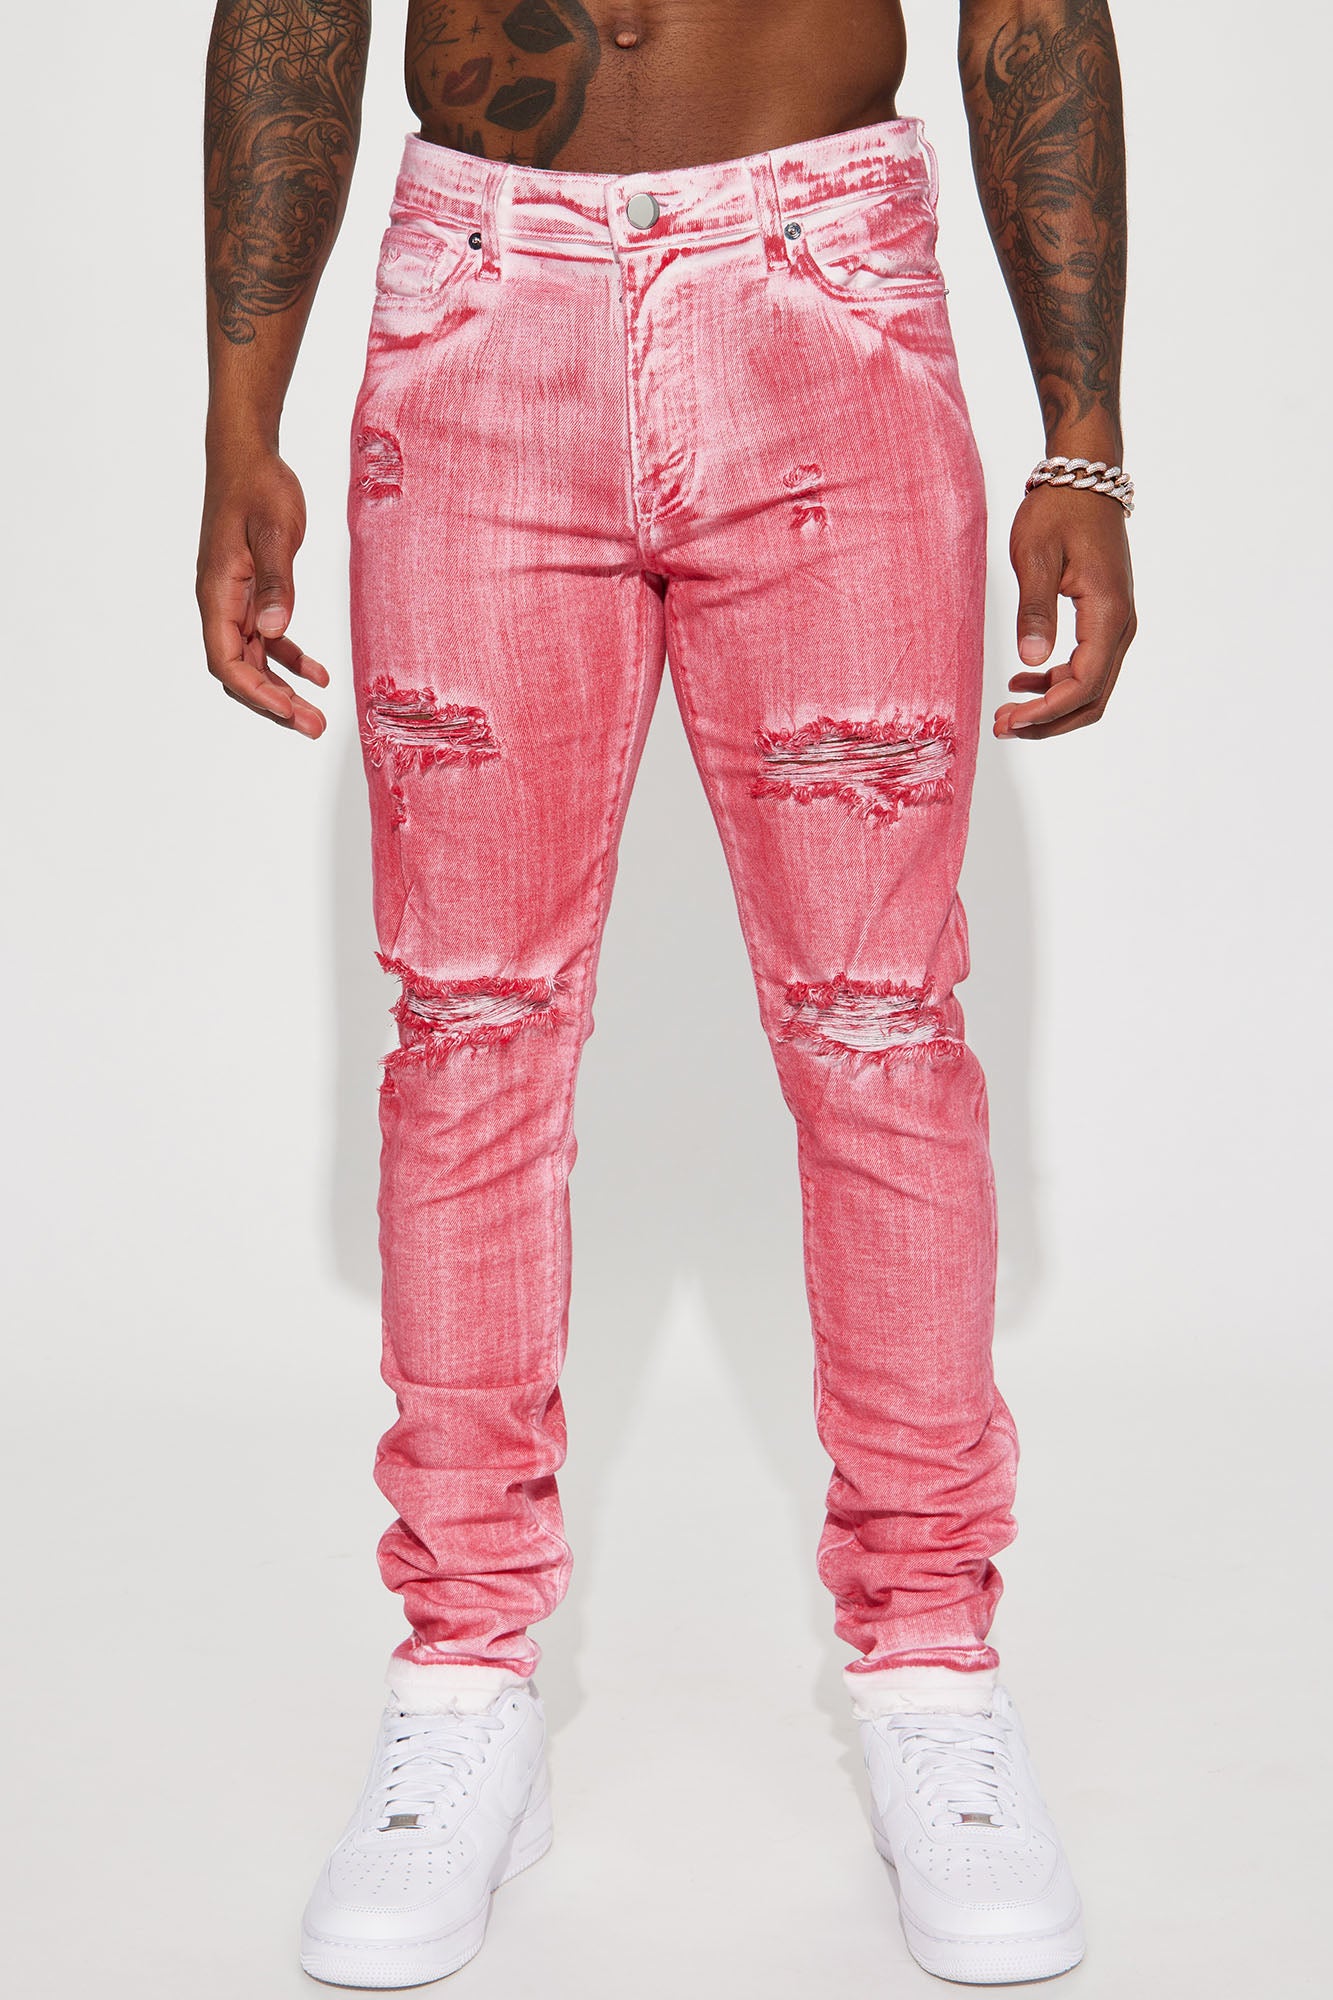 Keep A Secret Stacked Skinny Jeans - Red